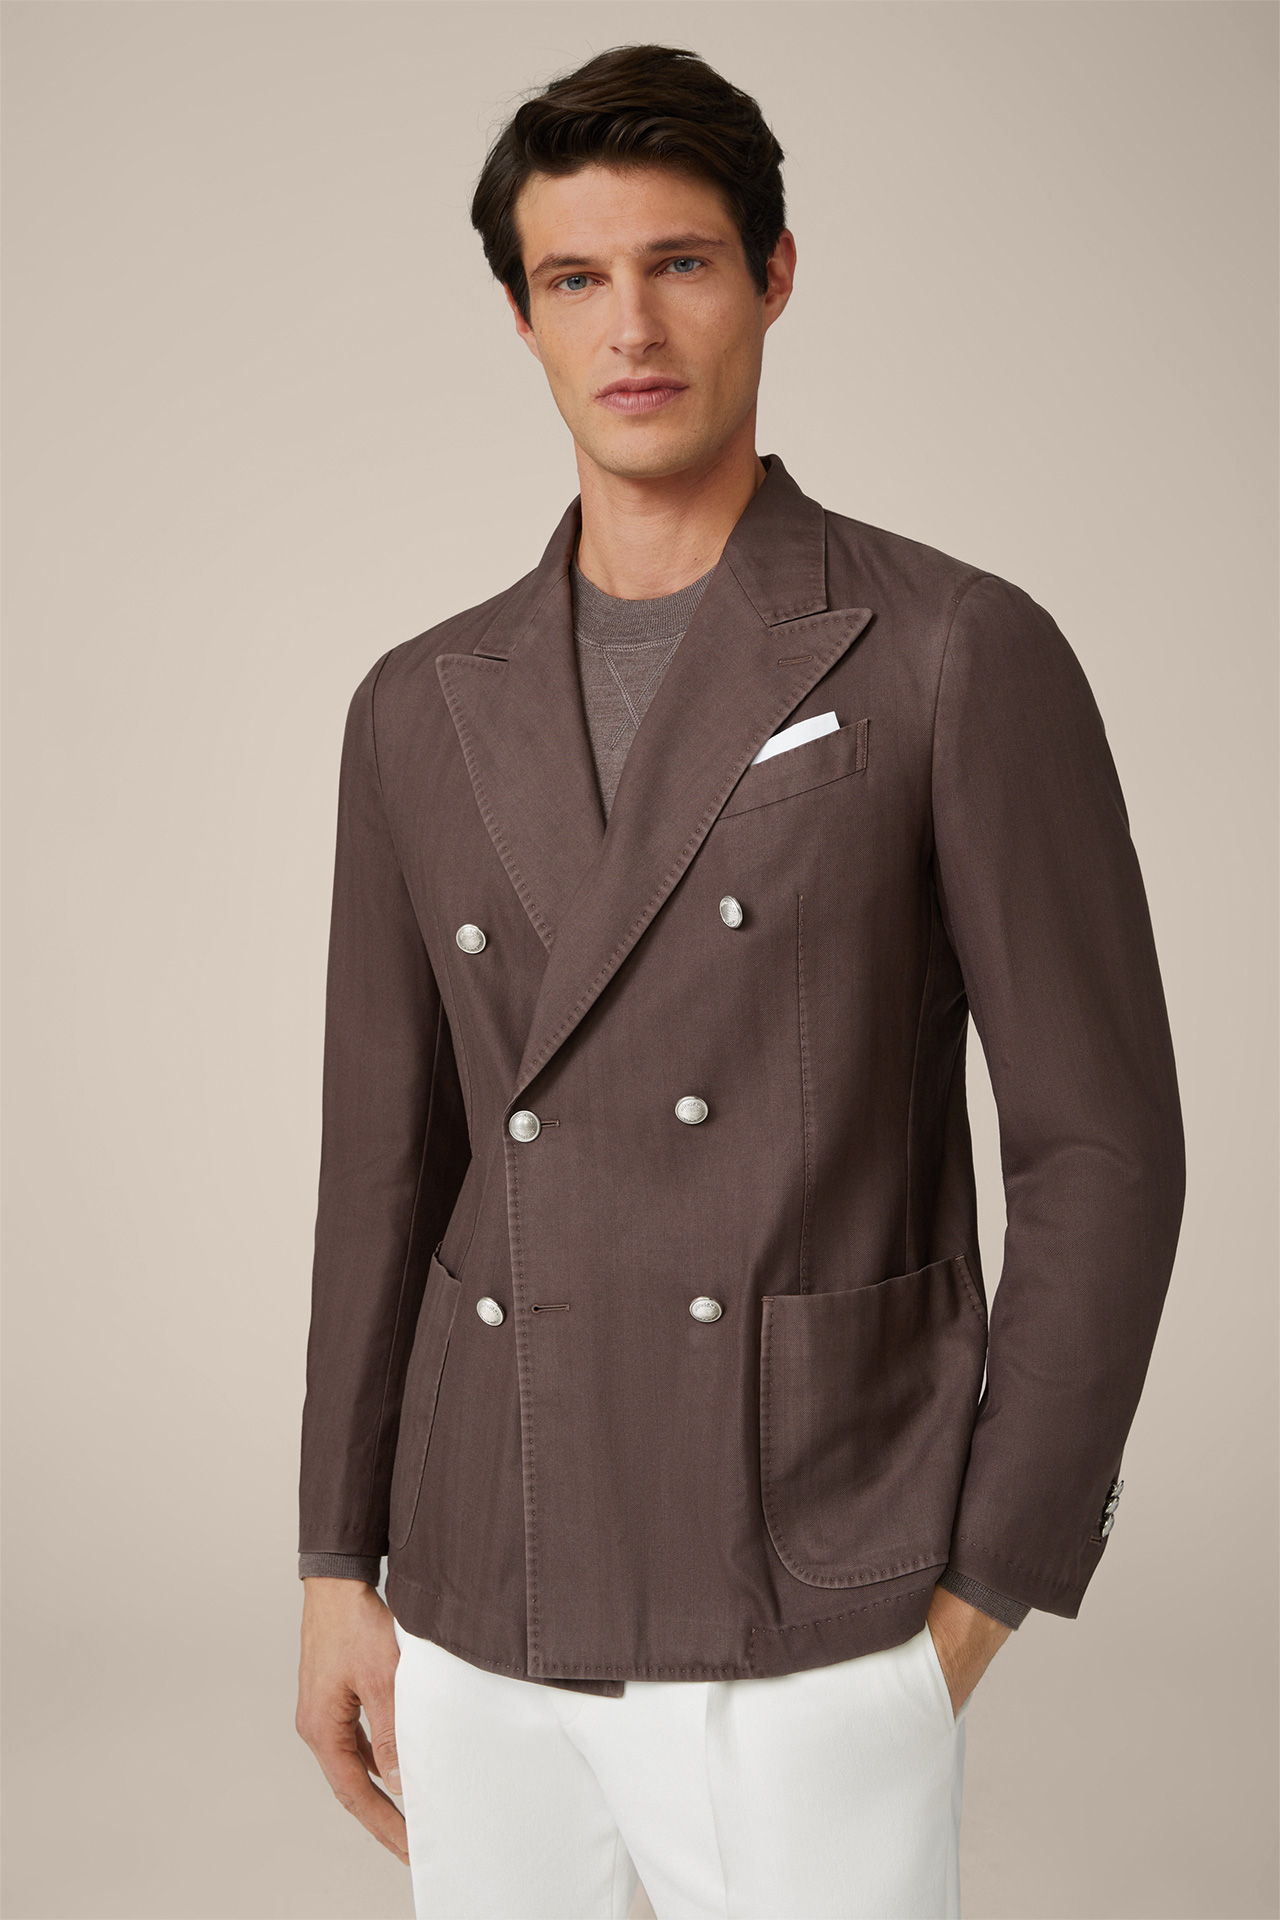 Secco Virgin Wool Double-Breasted Jacket in Brown